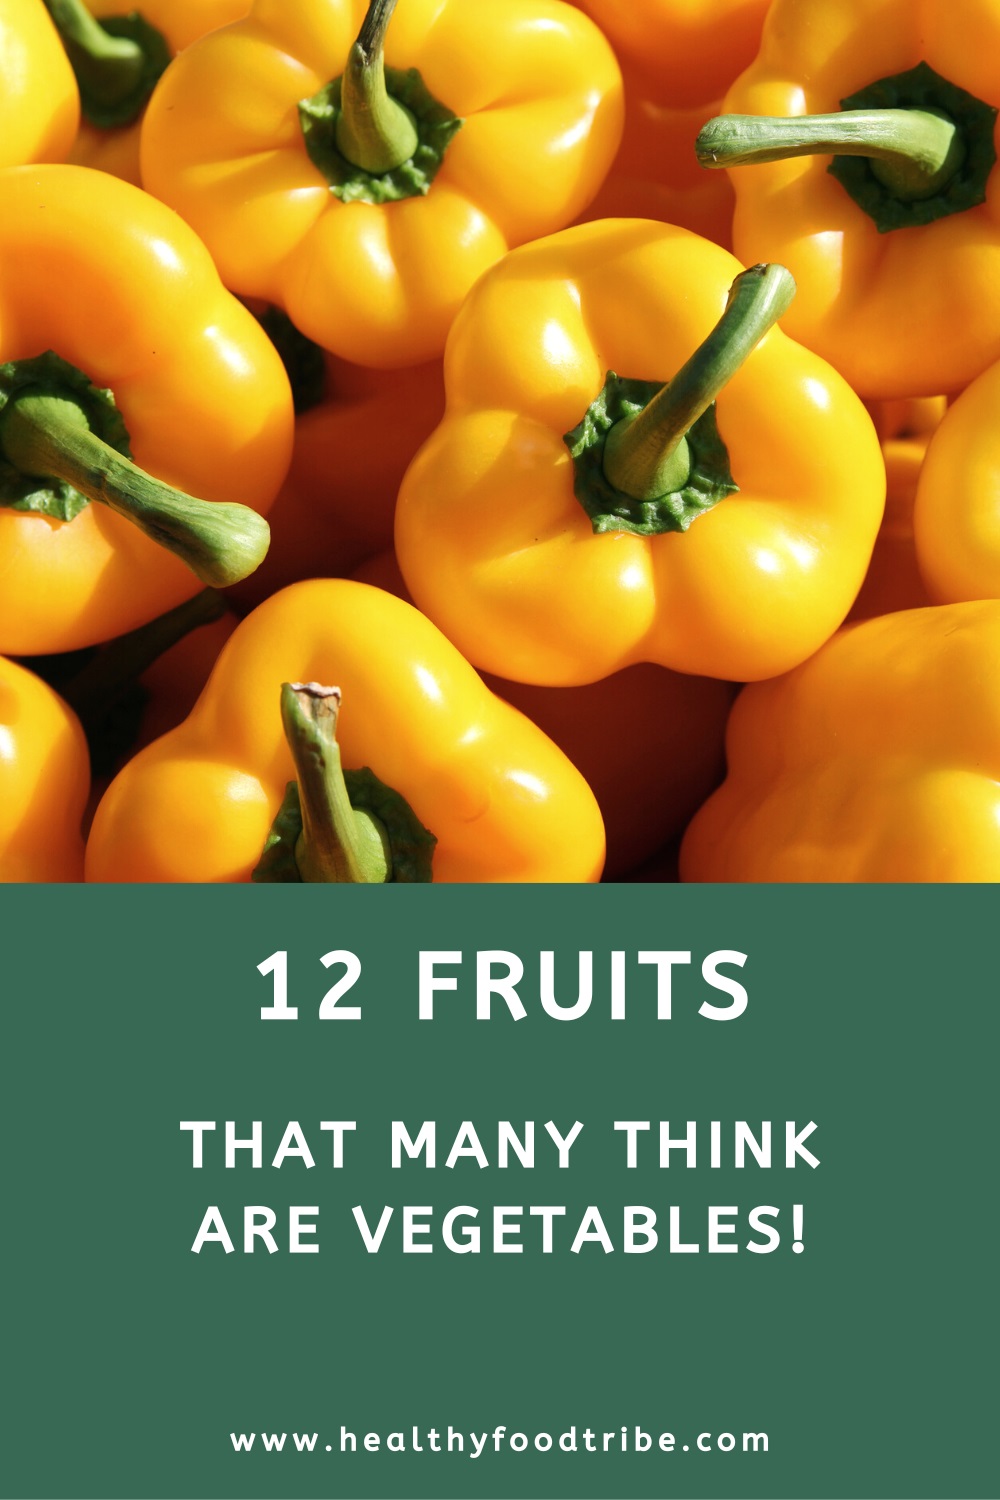 12 Fruits people think are vegetables